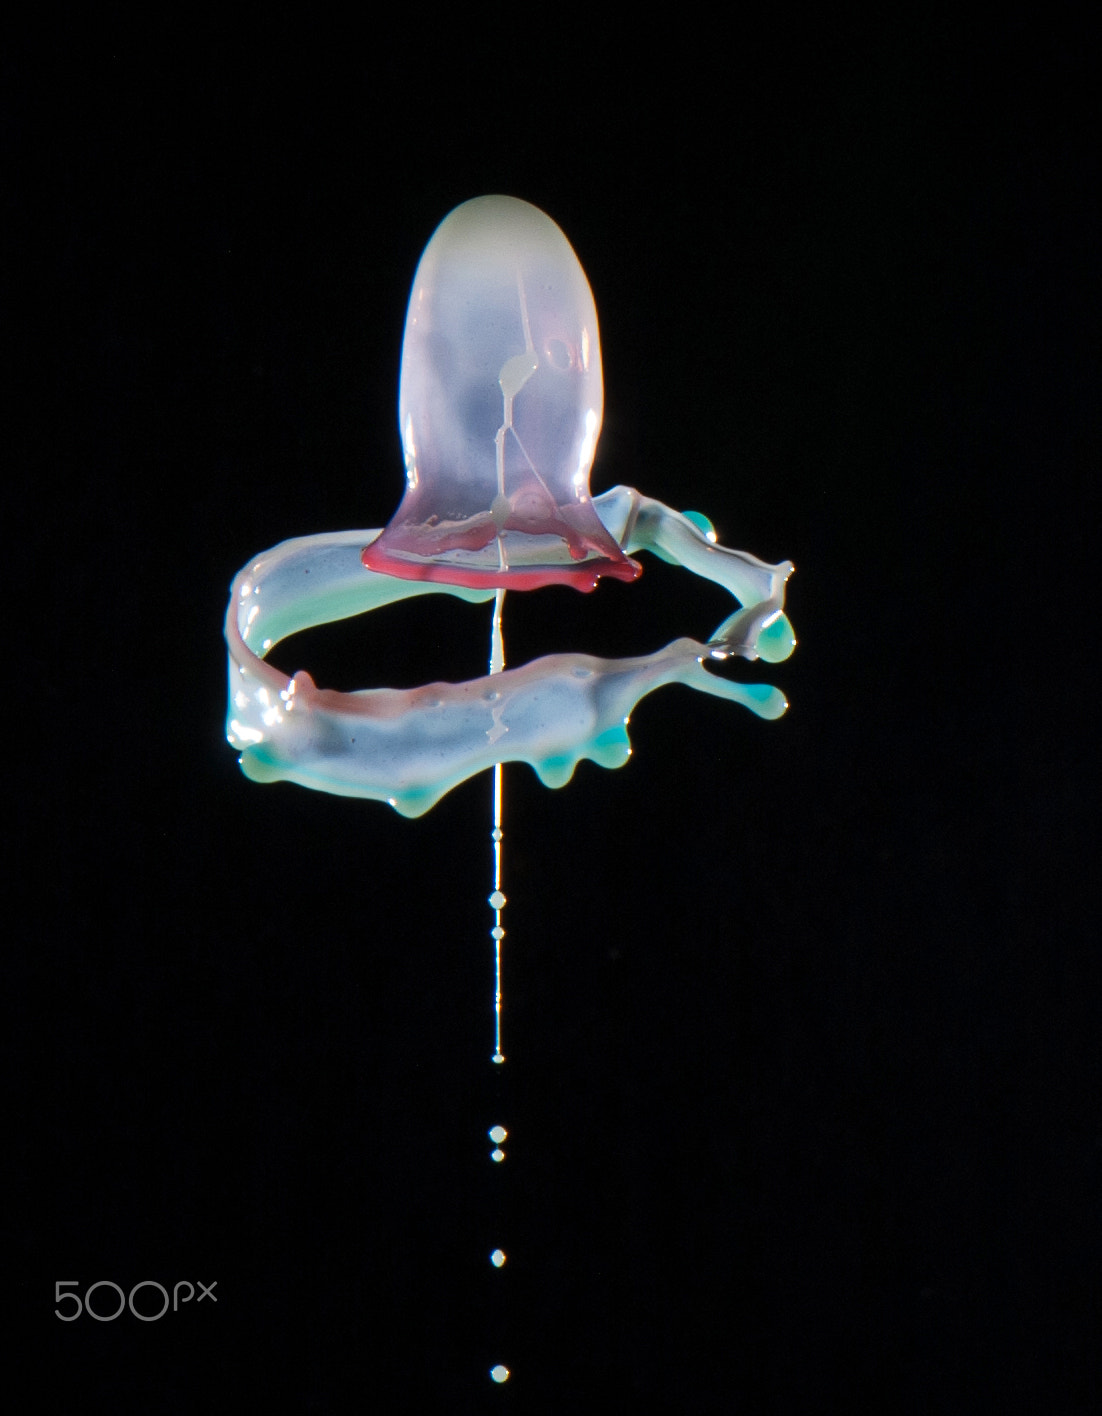 Nikon D80 + Nikon AF-S Micro-Nikkor 105mm F2.8G IF-ED VR sample photo. Water drop collision photography